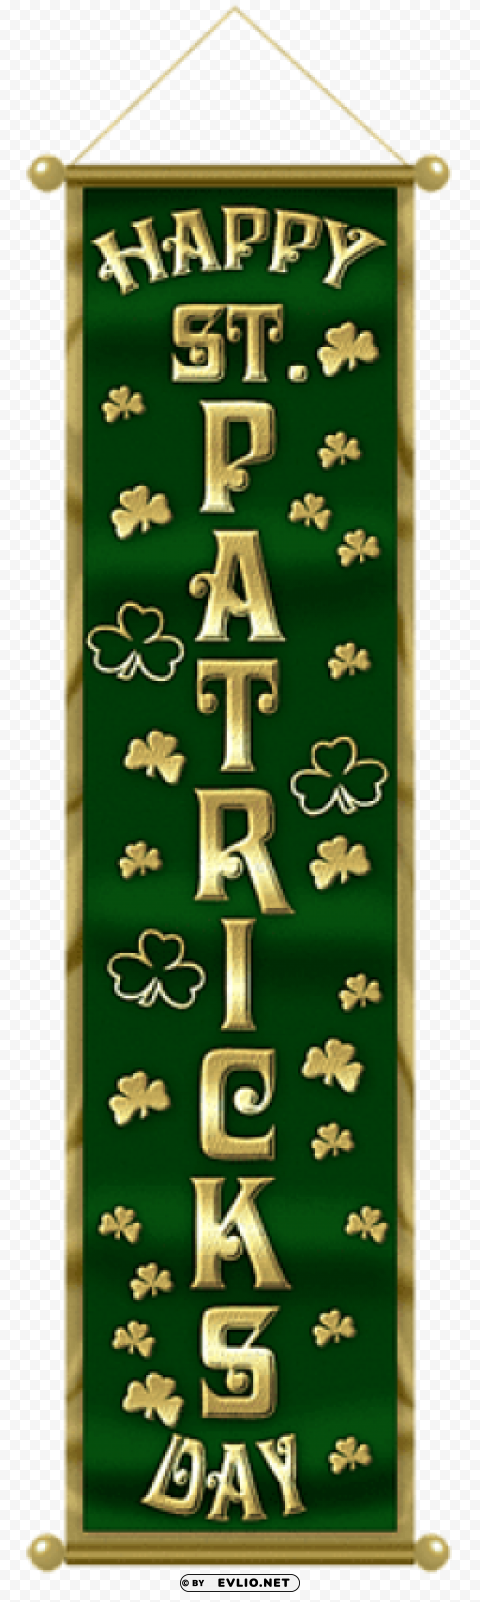  Happy St Patricks Day Baner Free PNG Images With Transparent Backgrounds